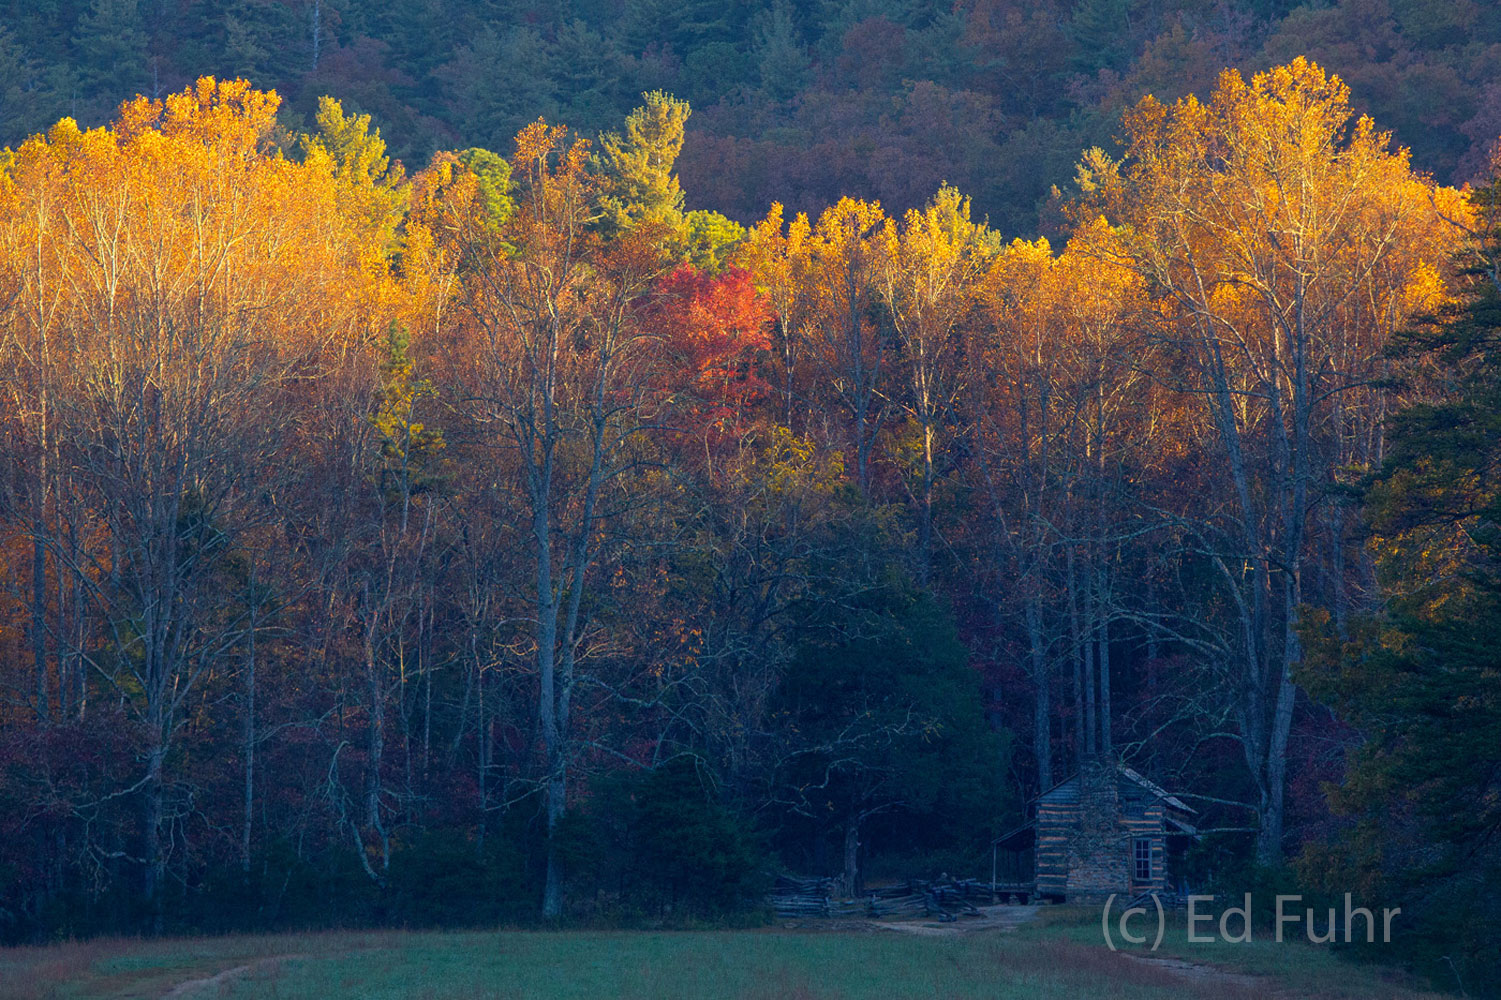 The last colors of autumn hang in the fading light of a late autumn afternoon.